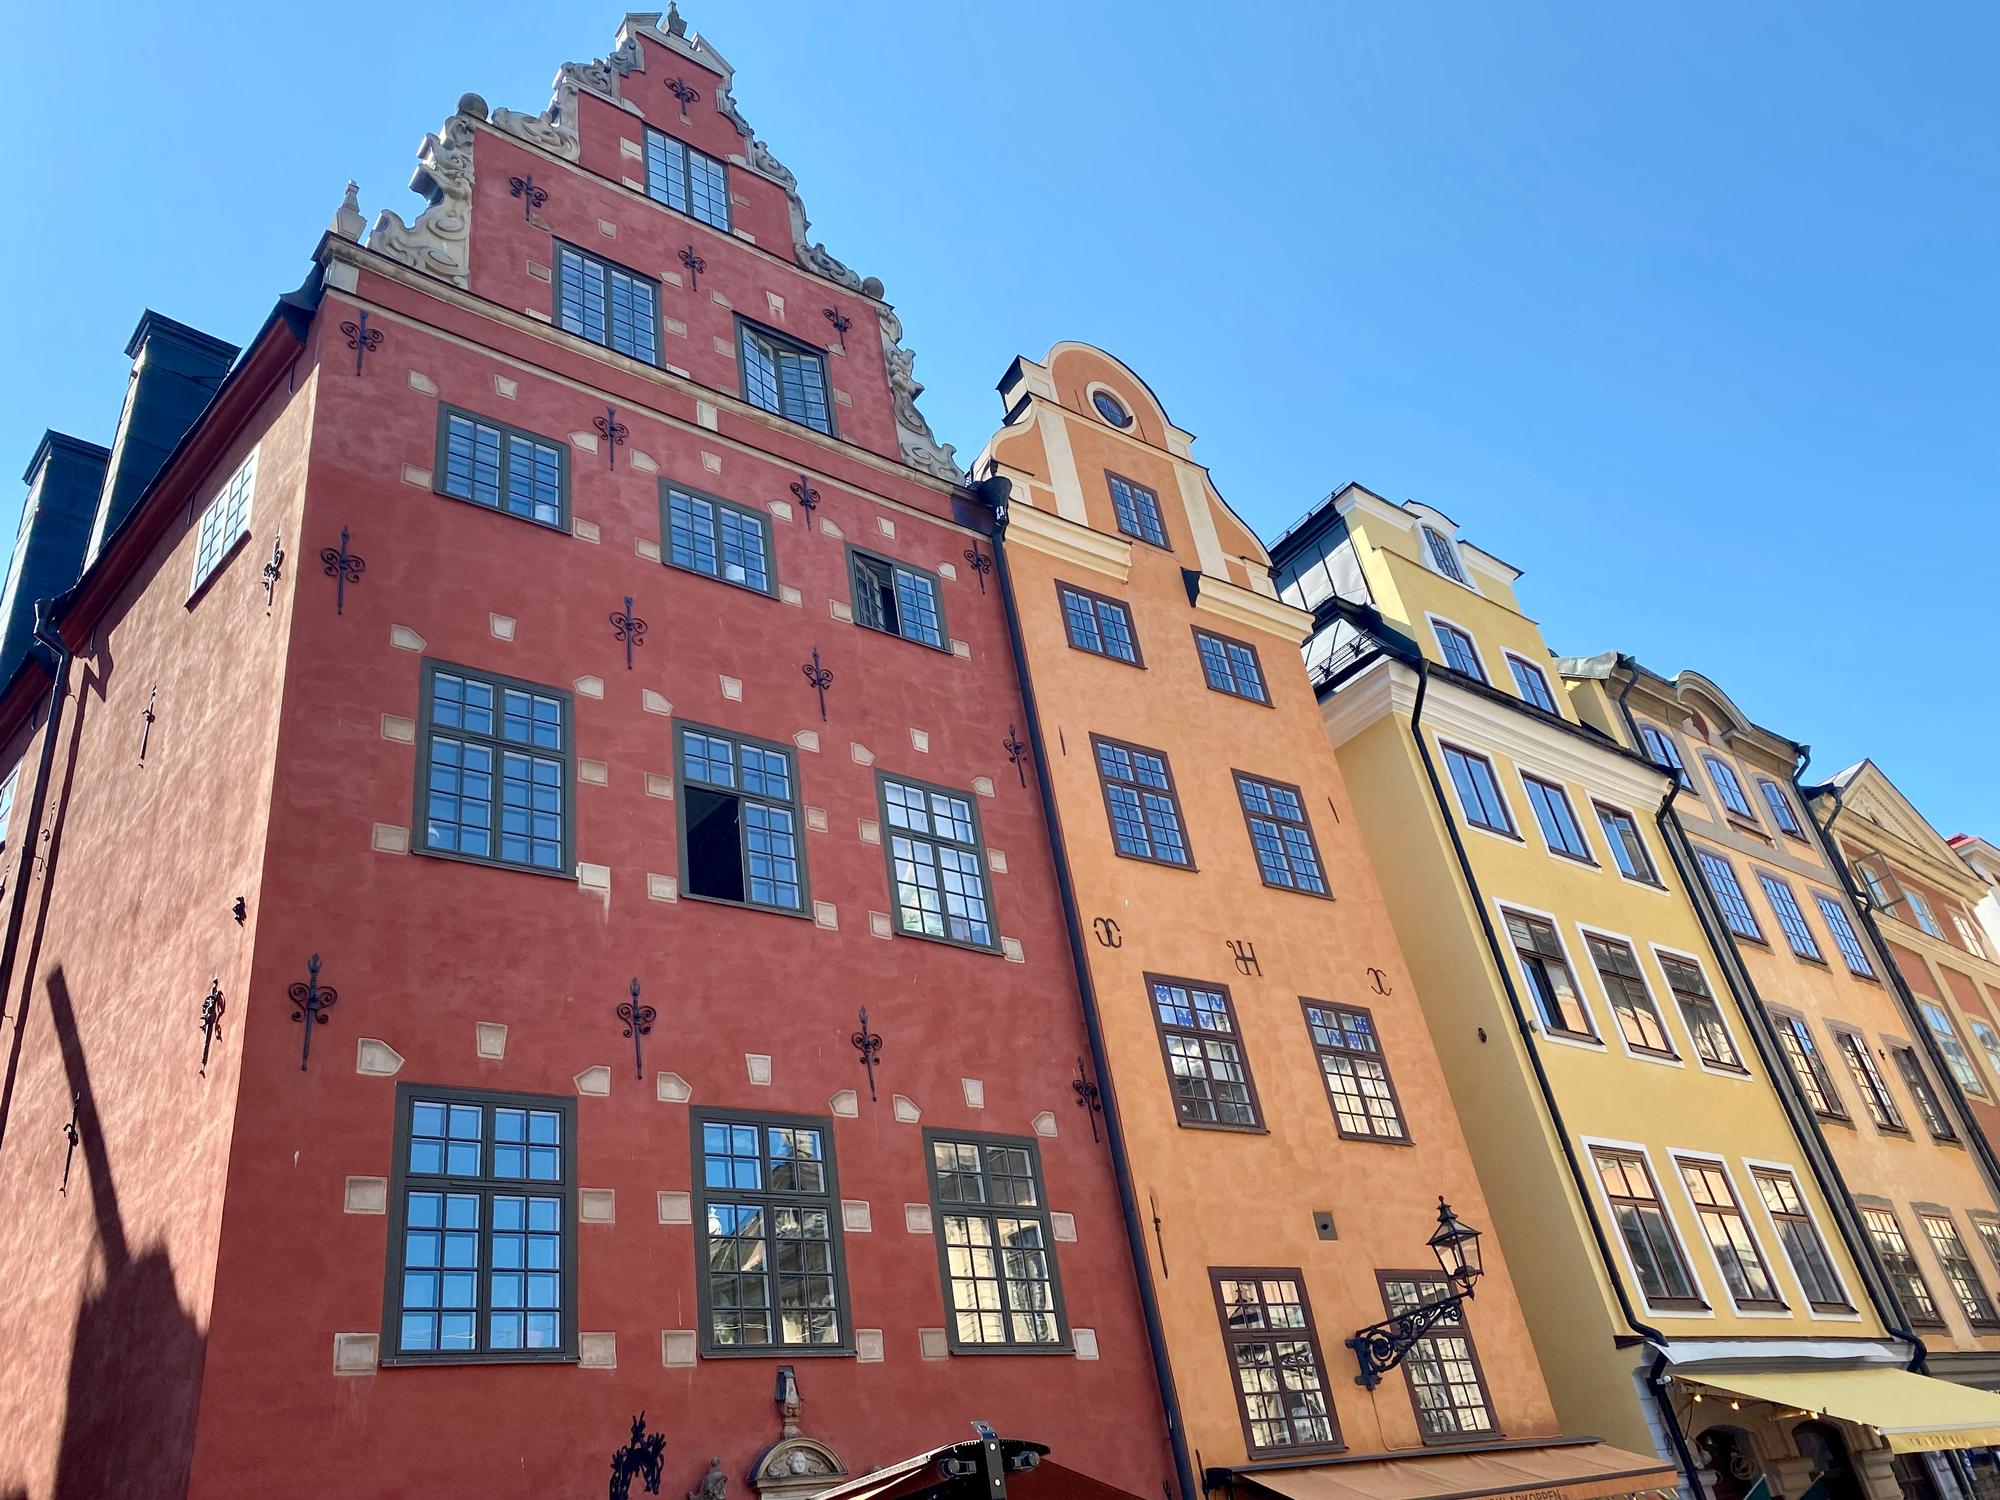 Gamla Stan--Buildings from the 1600's